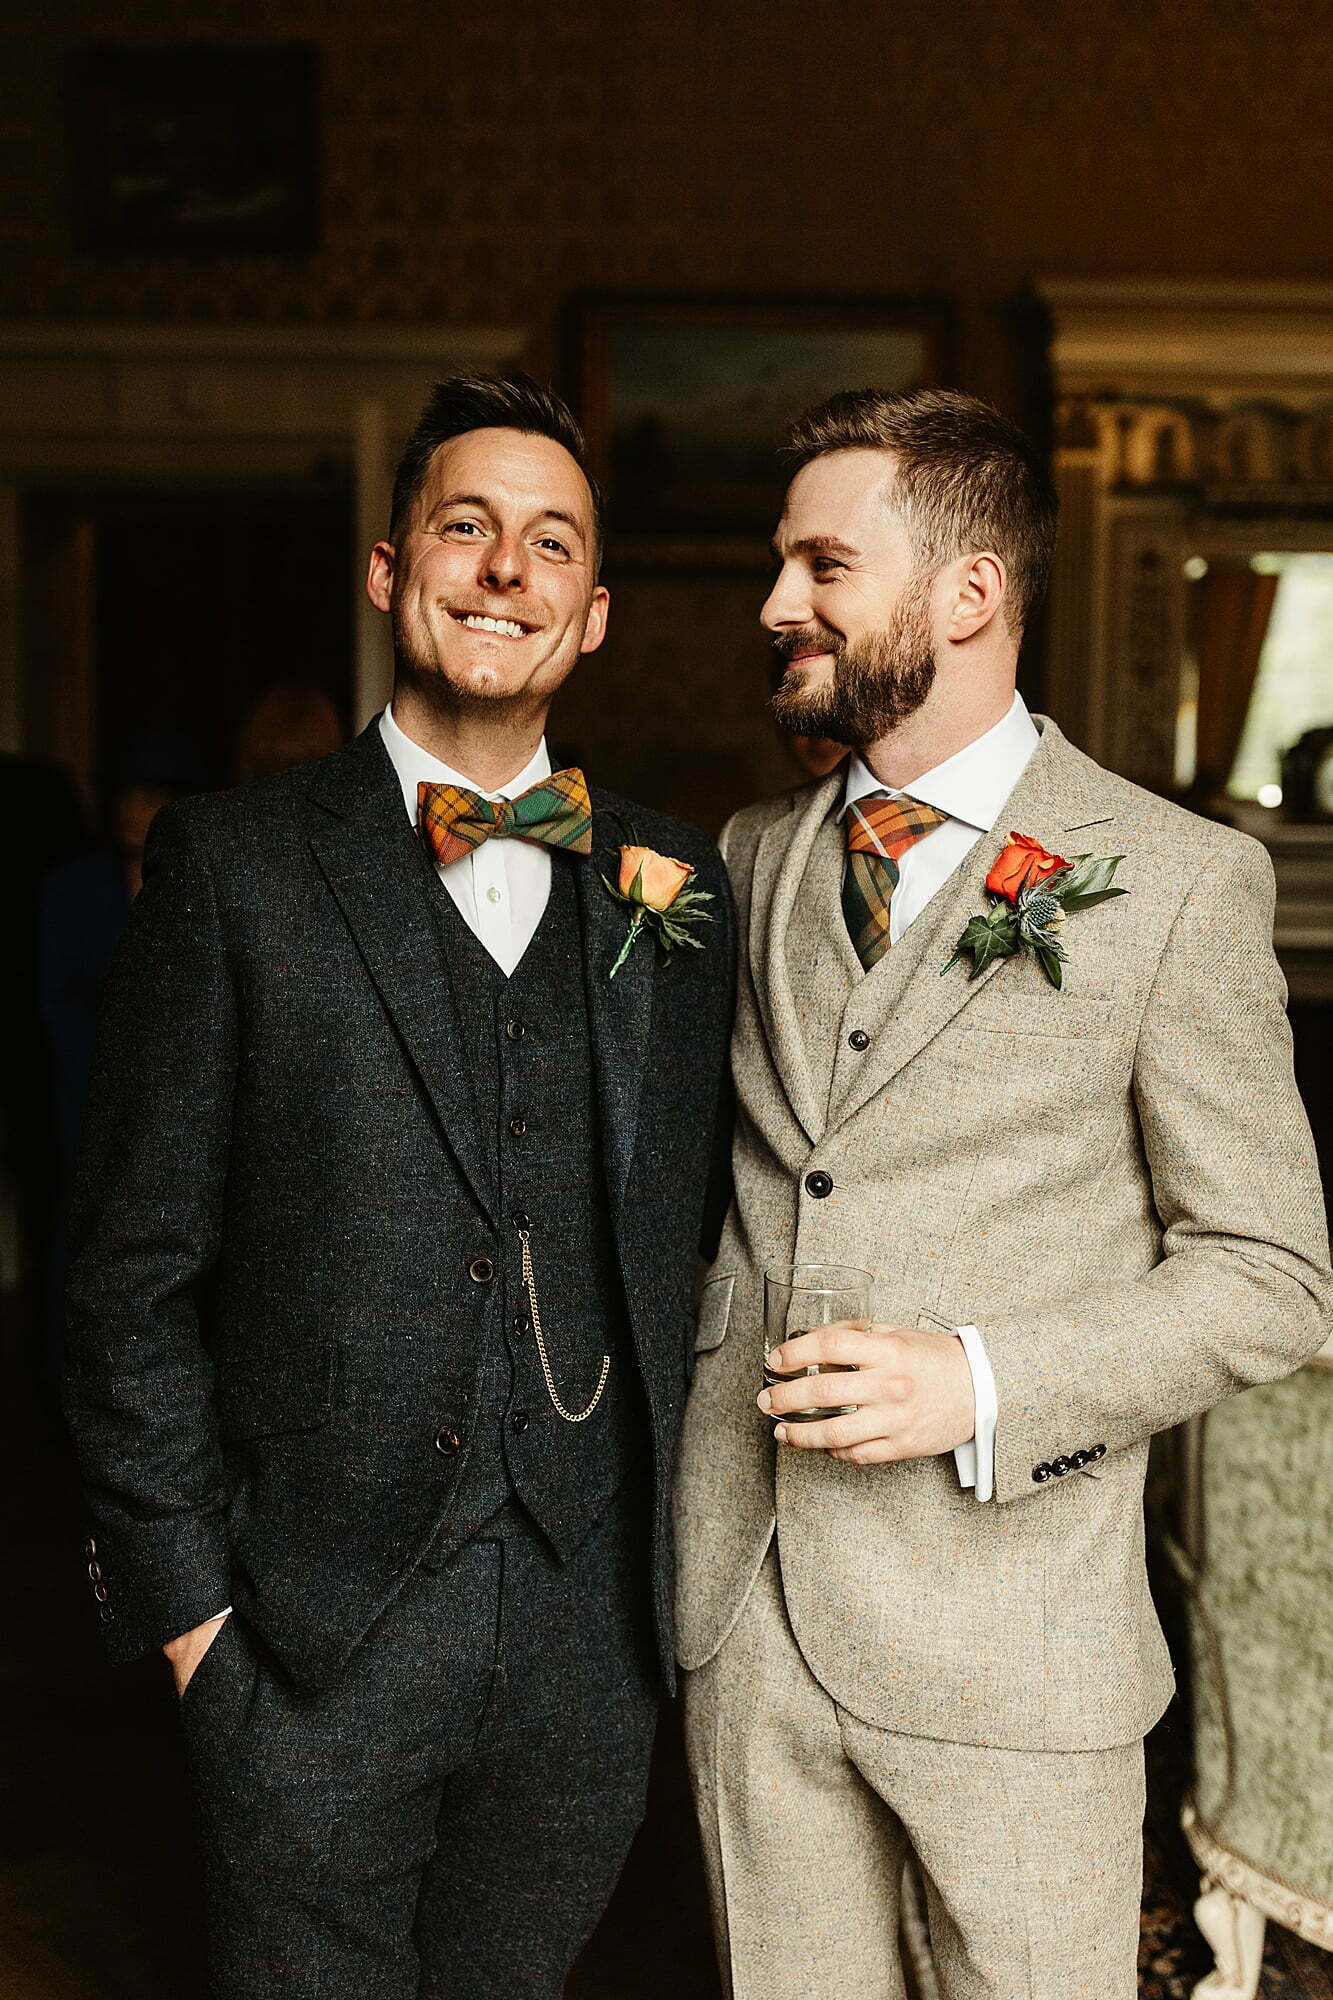 hays flowers wedding button hole two grooms same sex couple walker slater suits